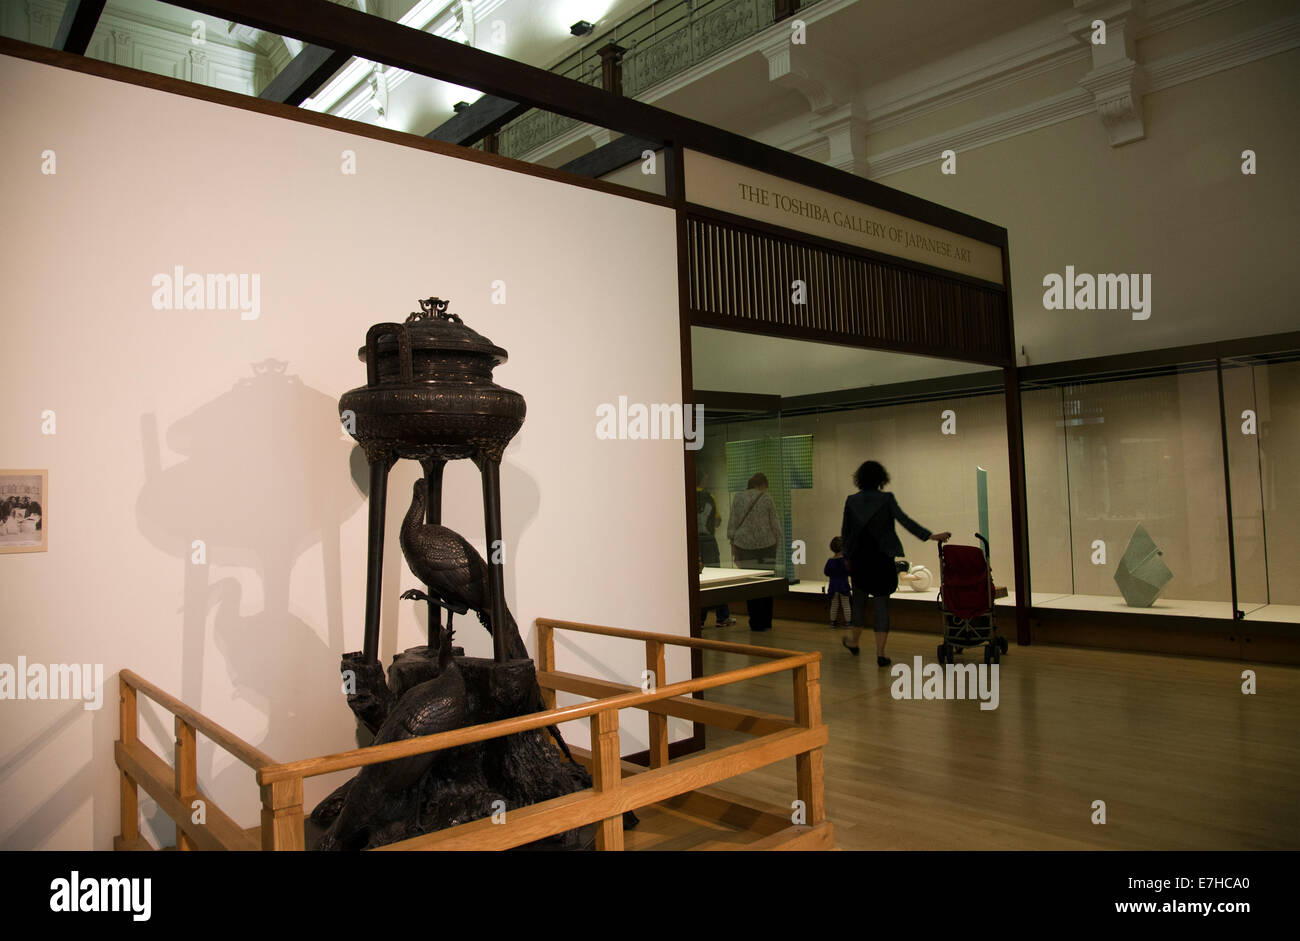 Toshiba Gallery at V&A Museum in London UK Stock Photo